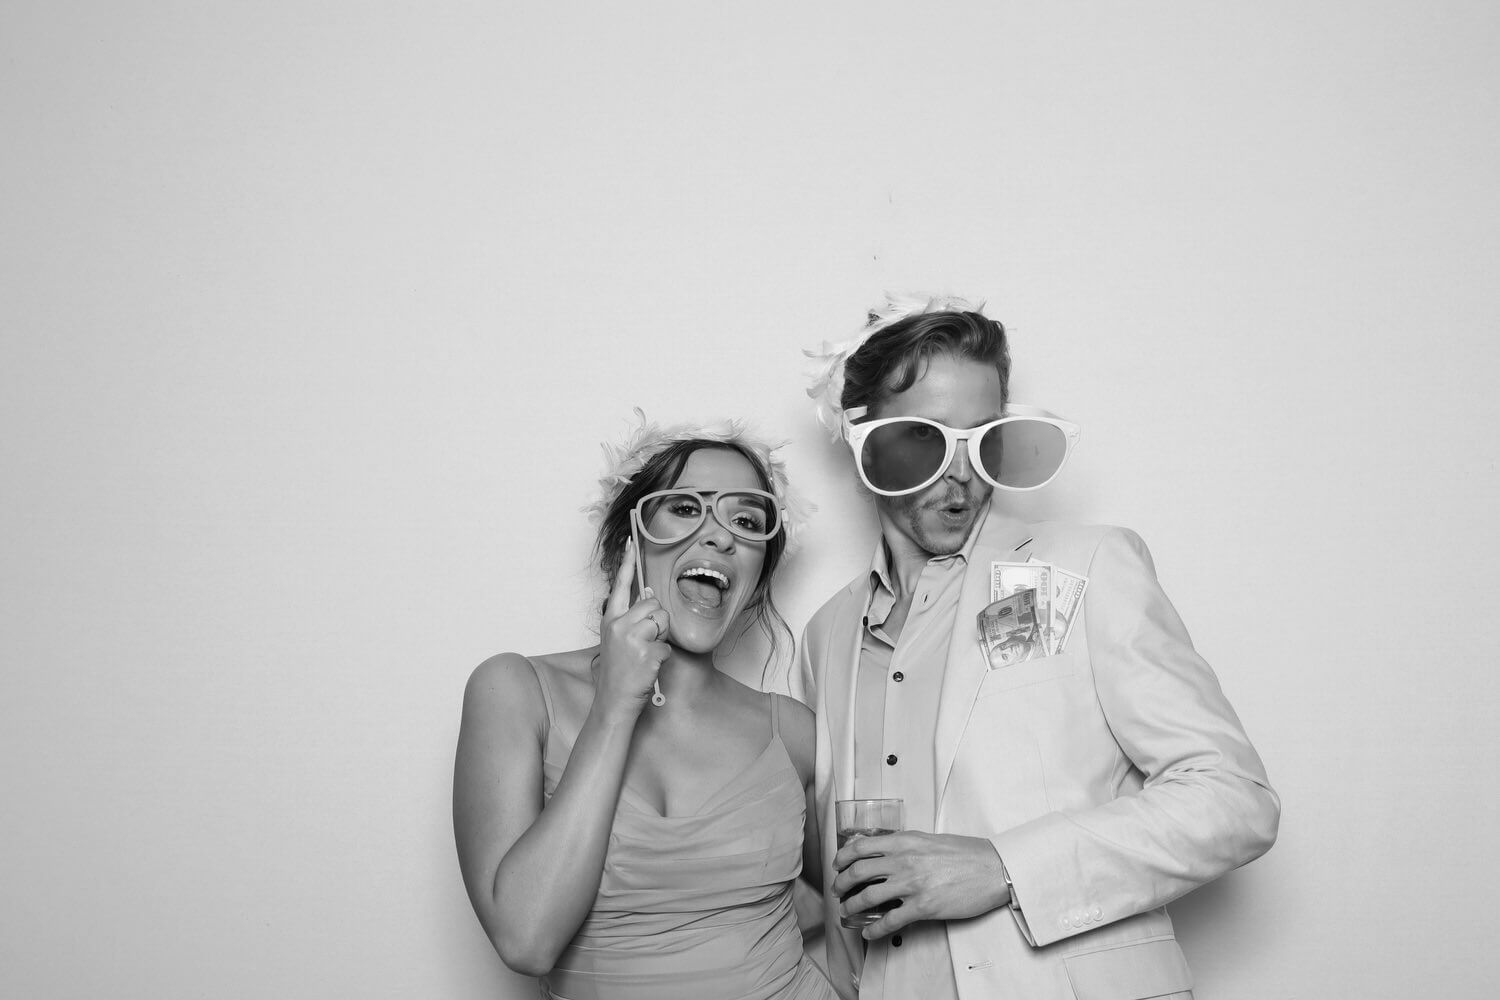 Lafayette,LA, Glam Photo Booth - Glamourous Black and white photo booth